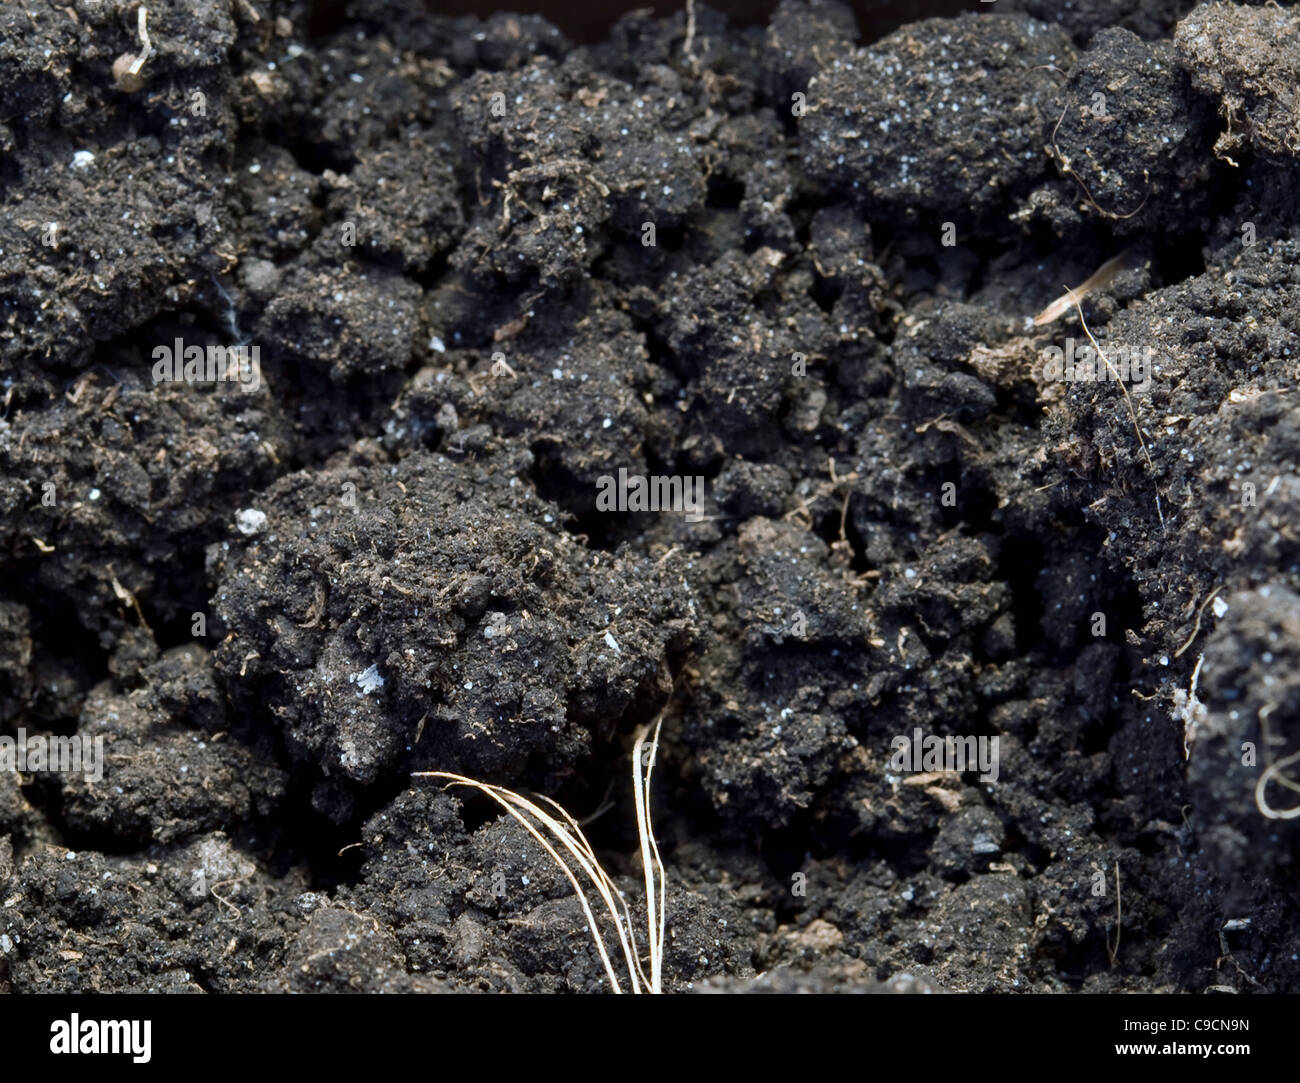 close up of soil and compost mix. Stock Photo